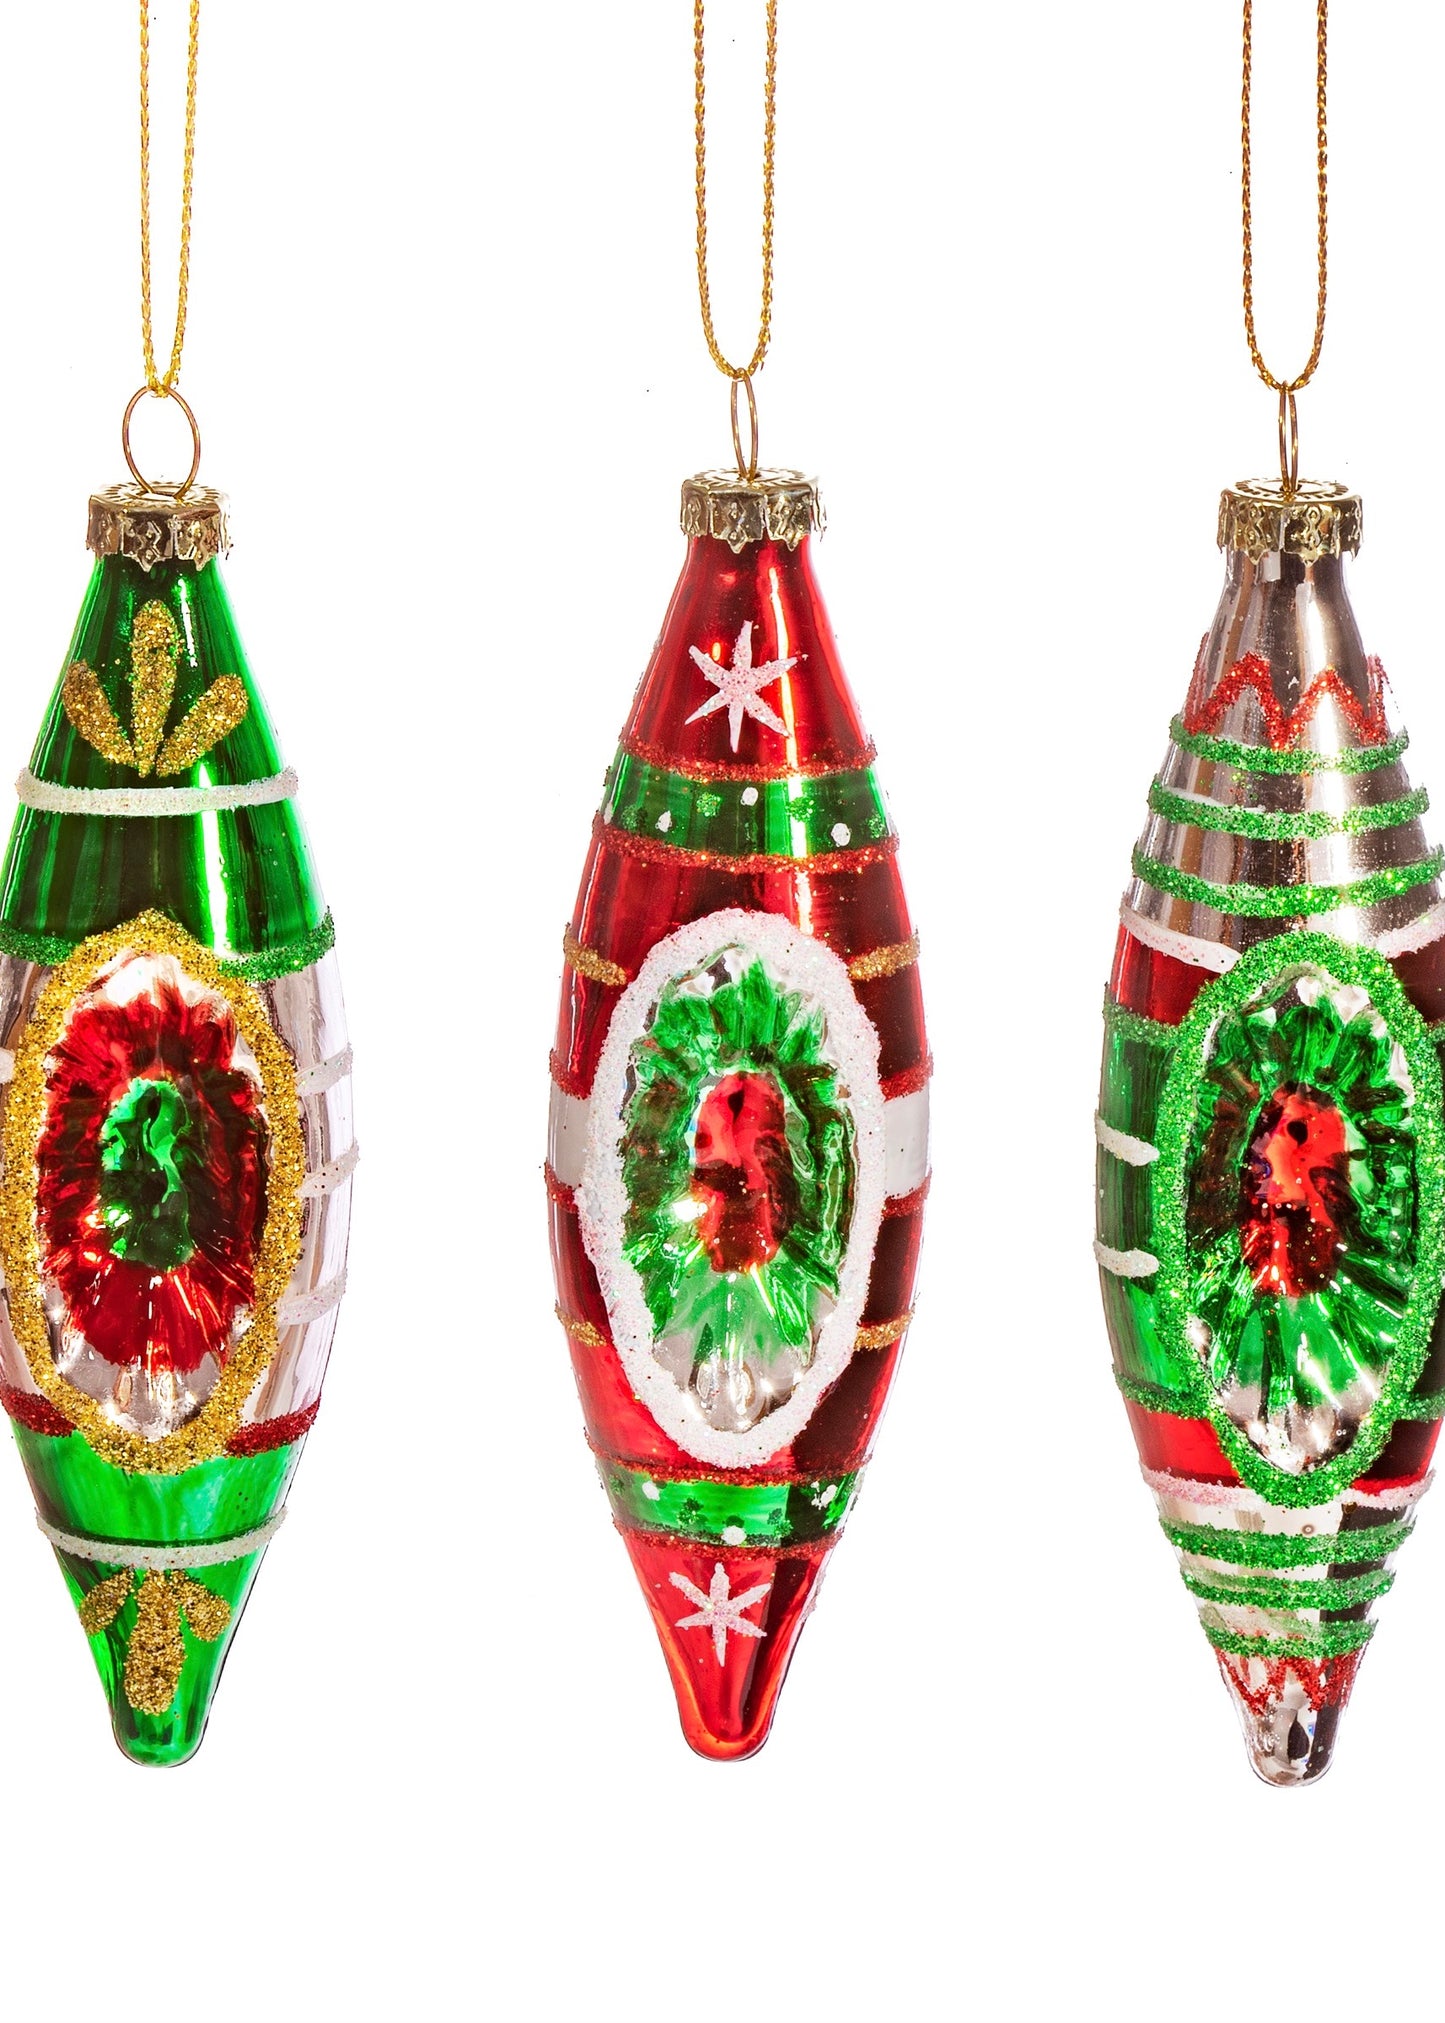 Long indented baubles in green and red with glitter